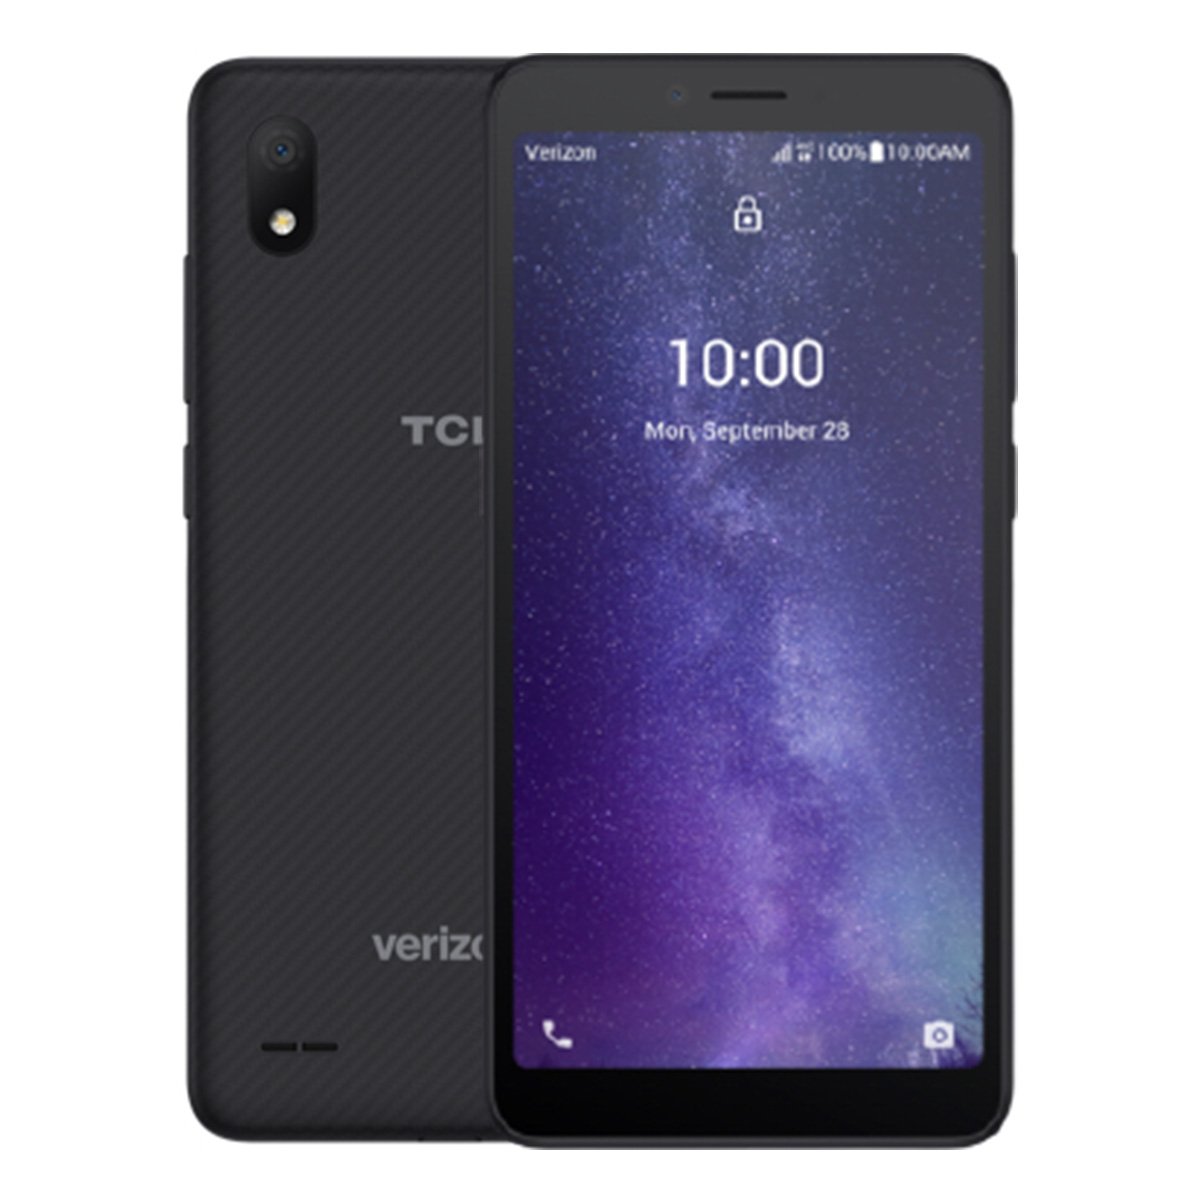 TCL Signa (Verizon Carrier Only)